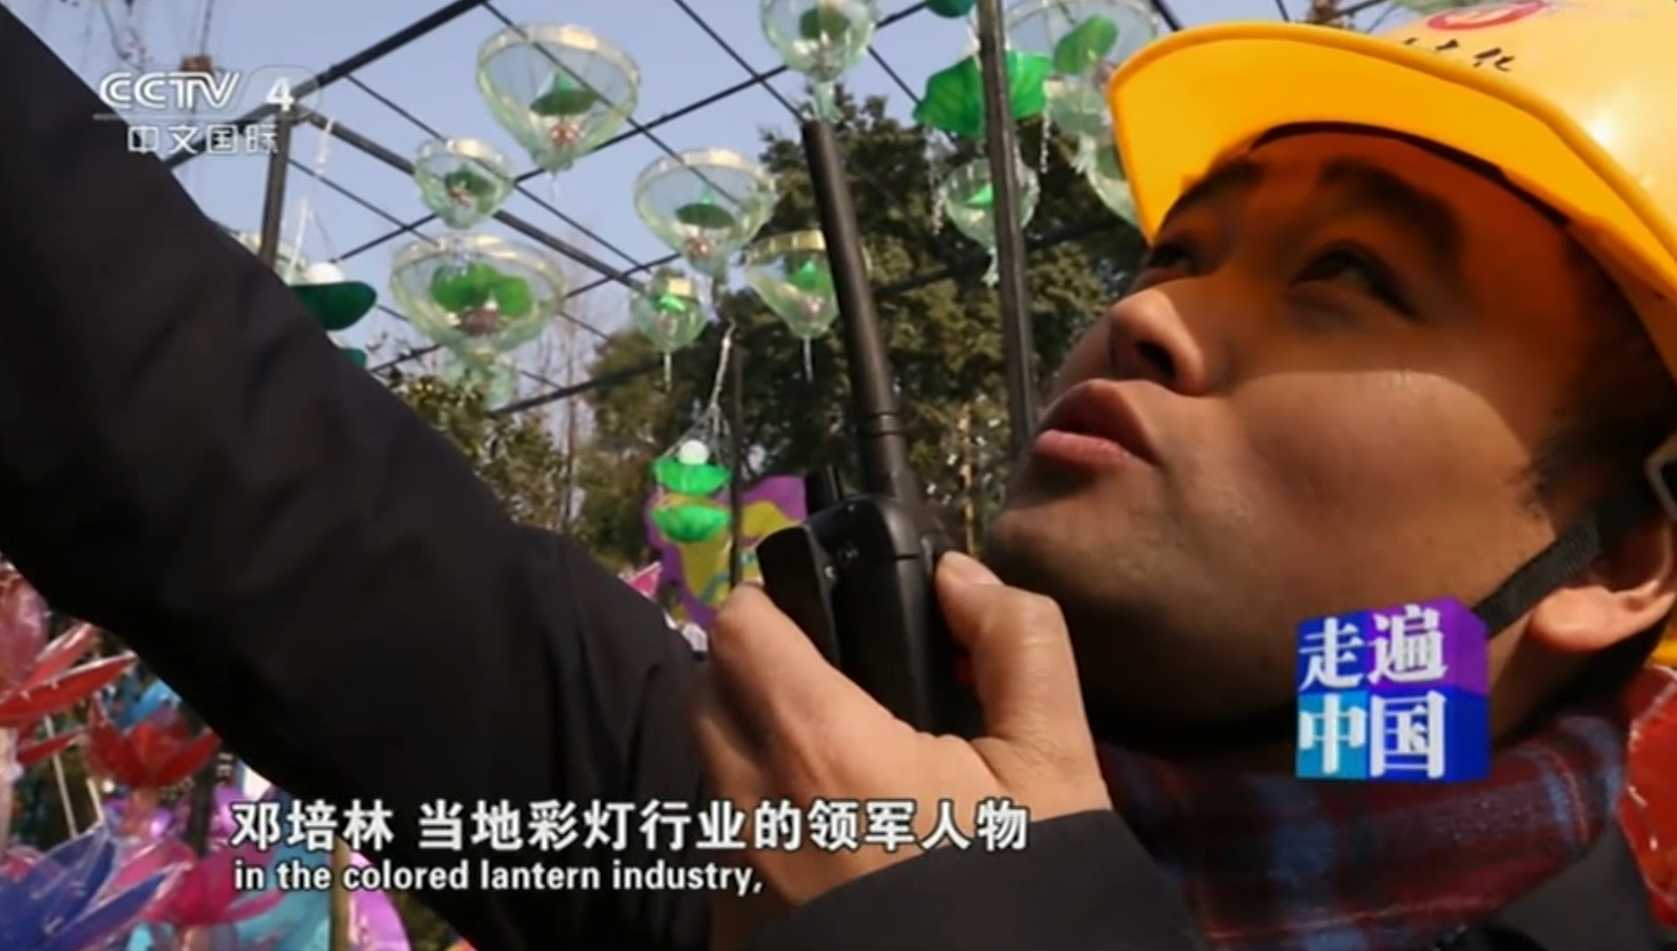 CCTV's "Traveling All Over China" program group came to the scene of Longteng lamp making